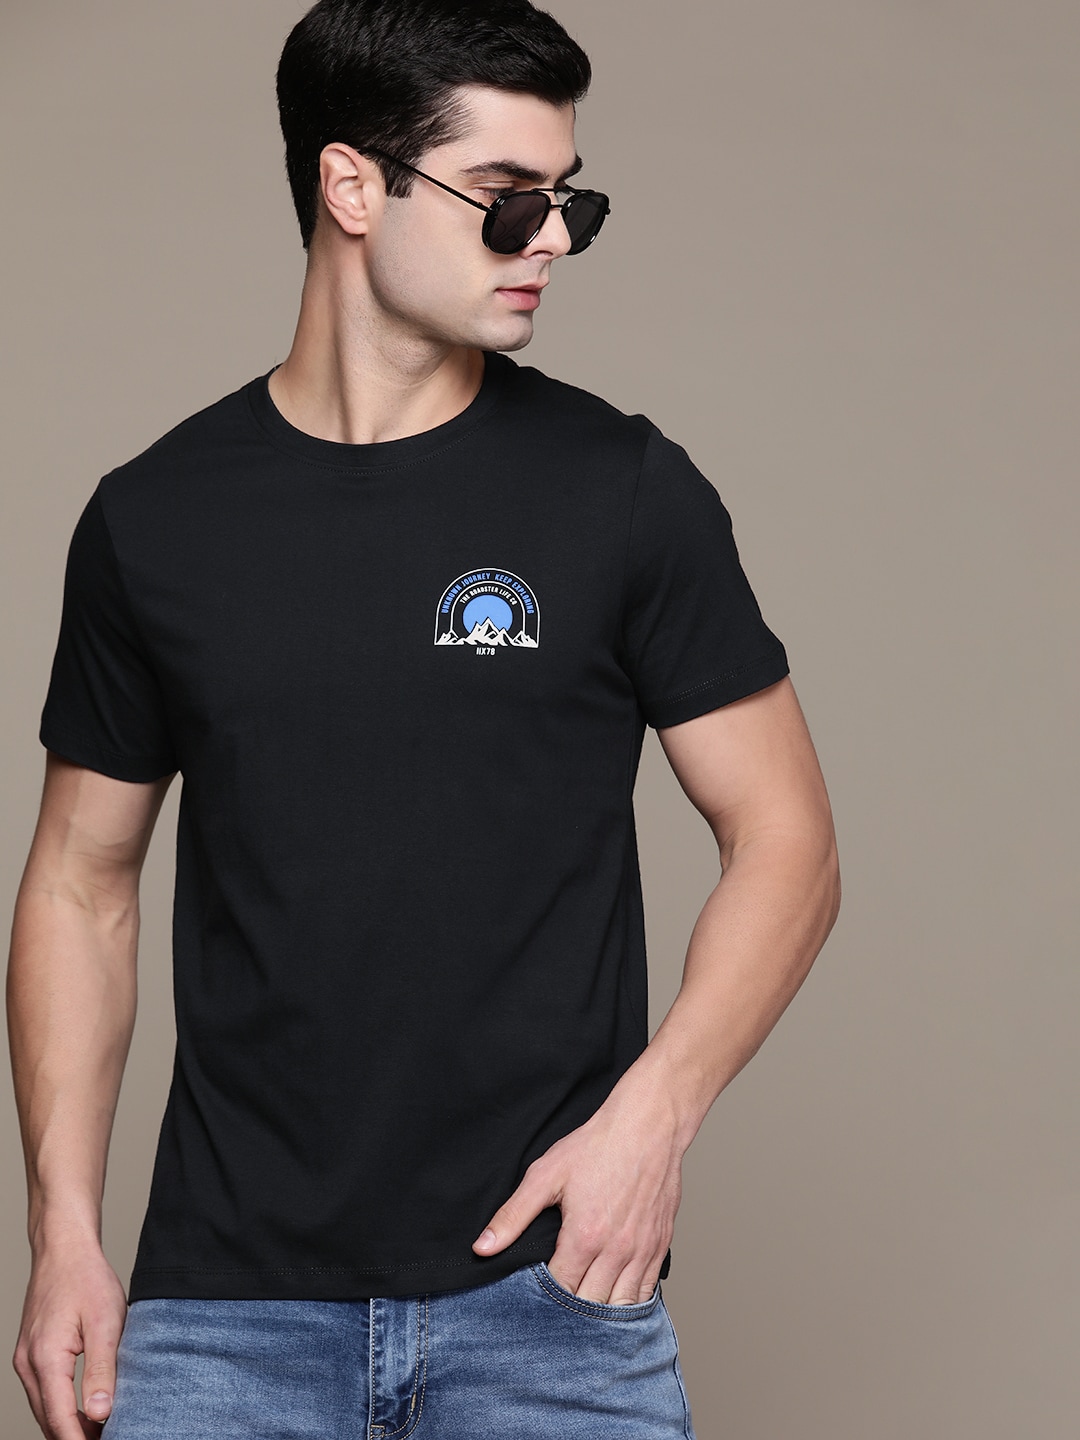 The Roadster Lifestyle Co. Printed Detail Pure Cotton T-shirt